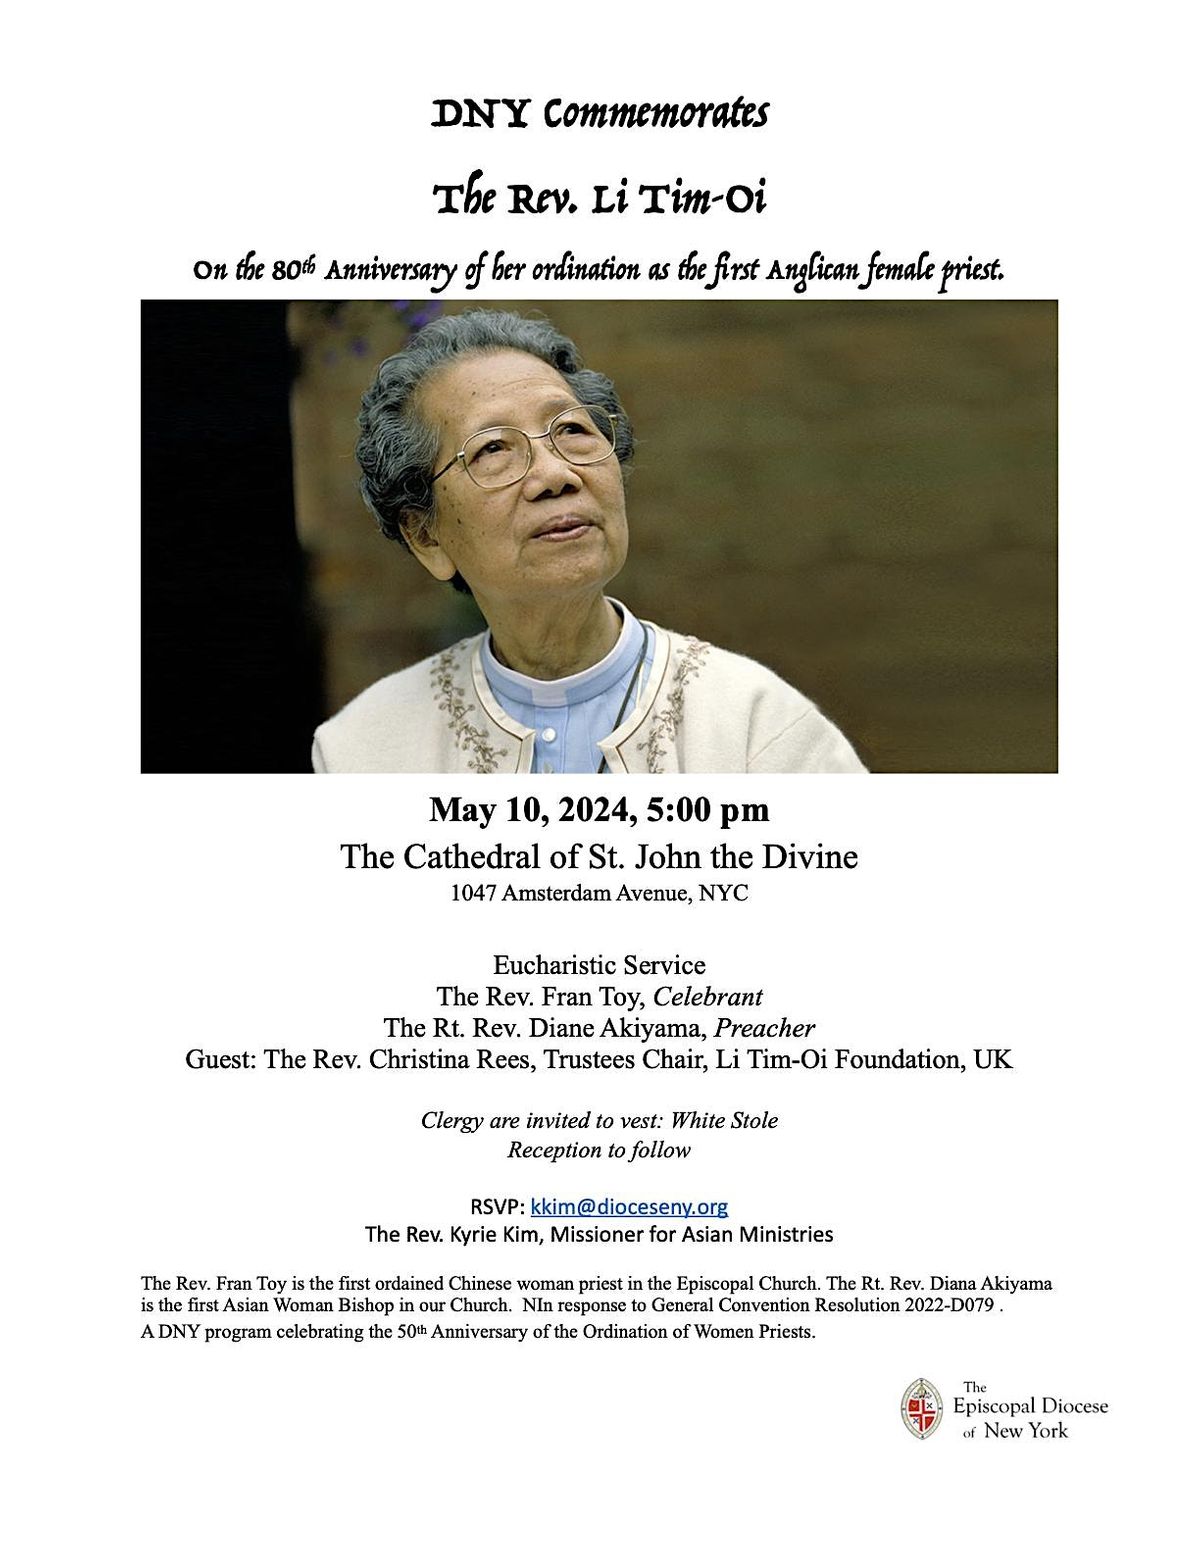 A Talk with The Rev. Christina Rees, Director of the Li Tim-Oi Foundation